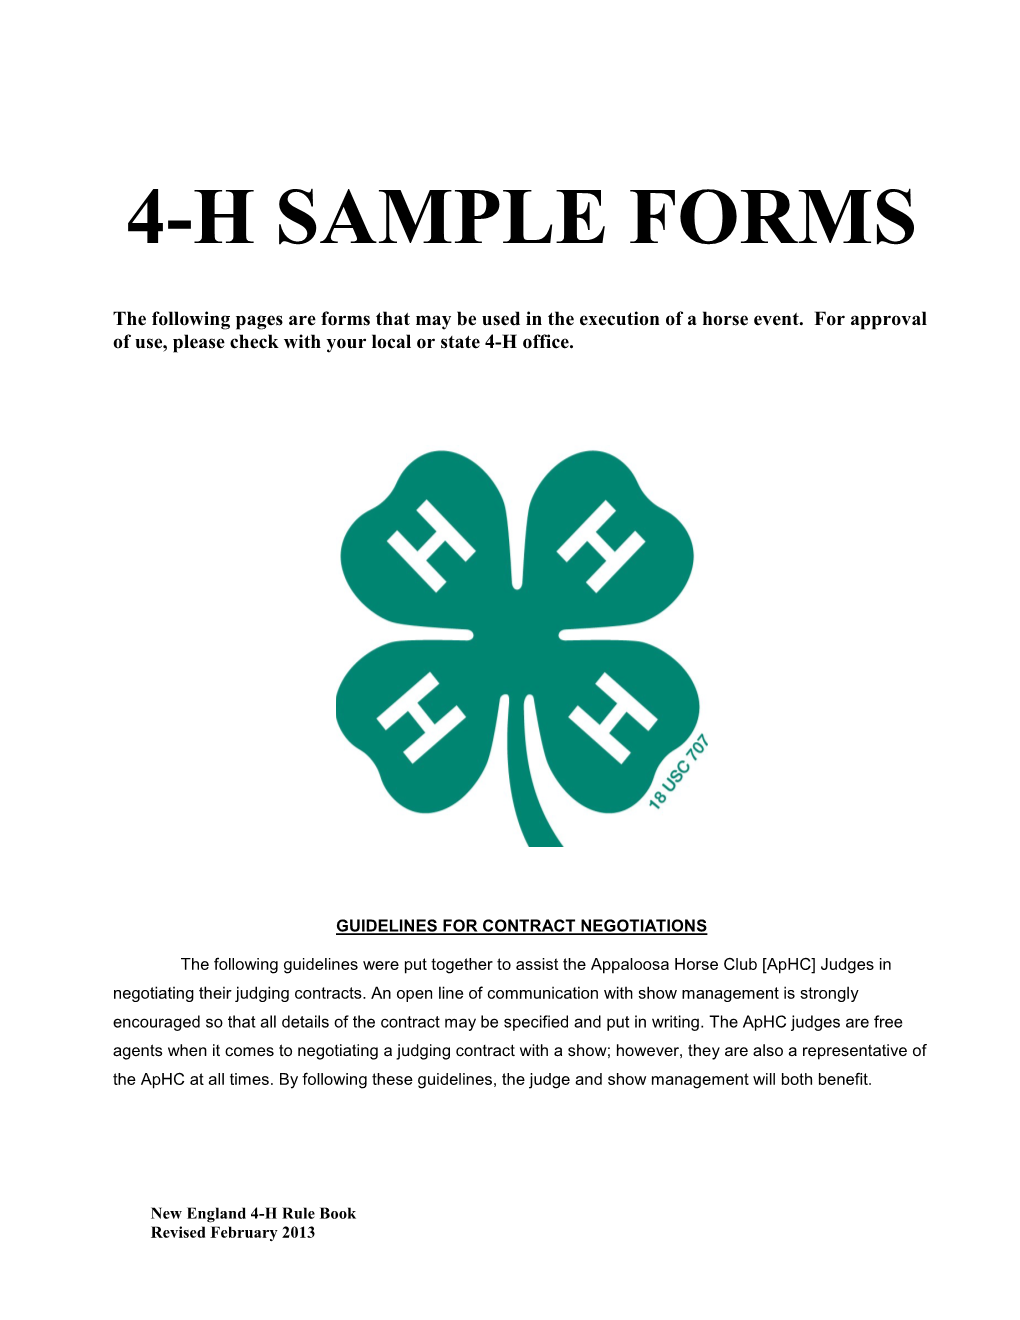 4-H Sample Forms